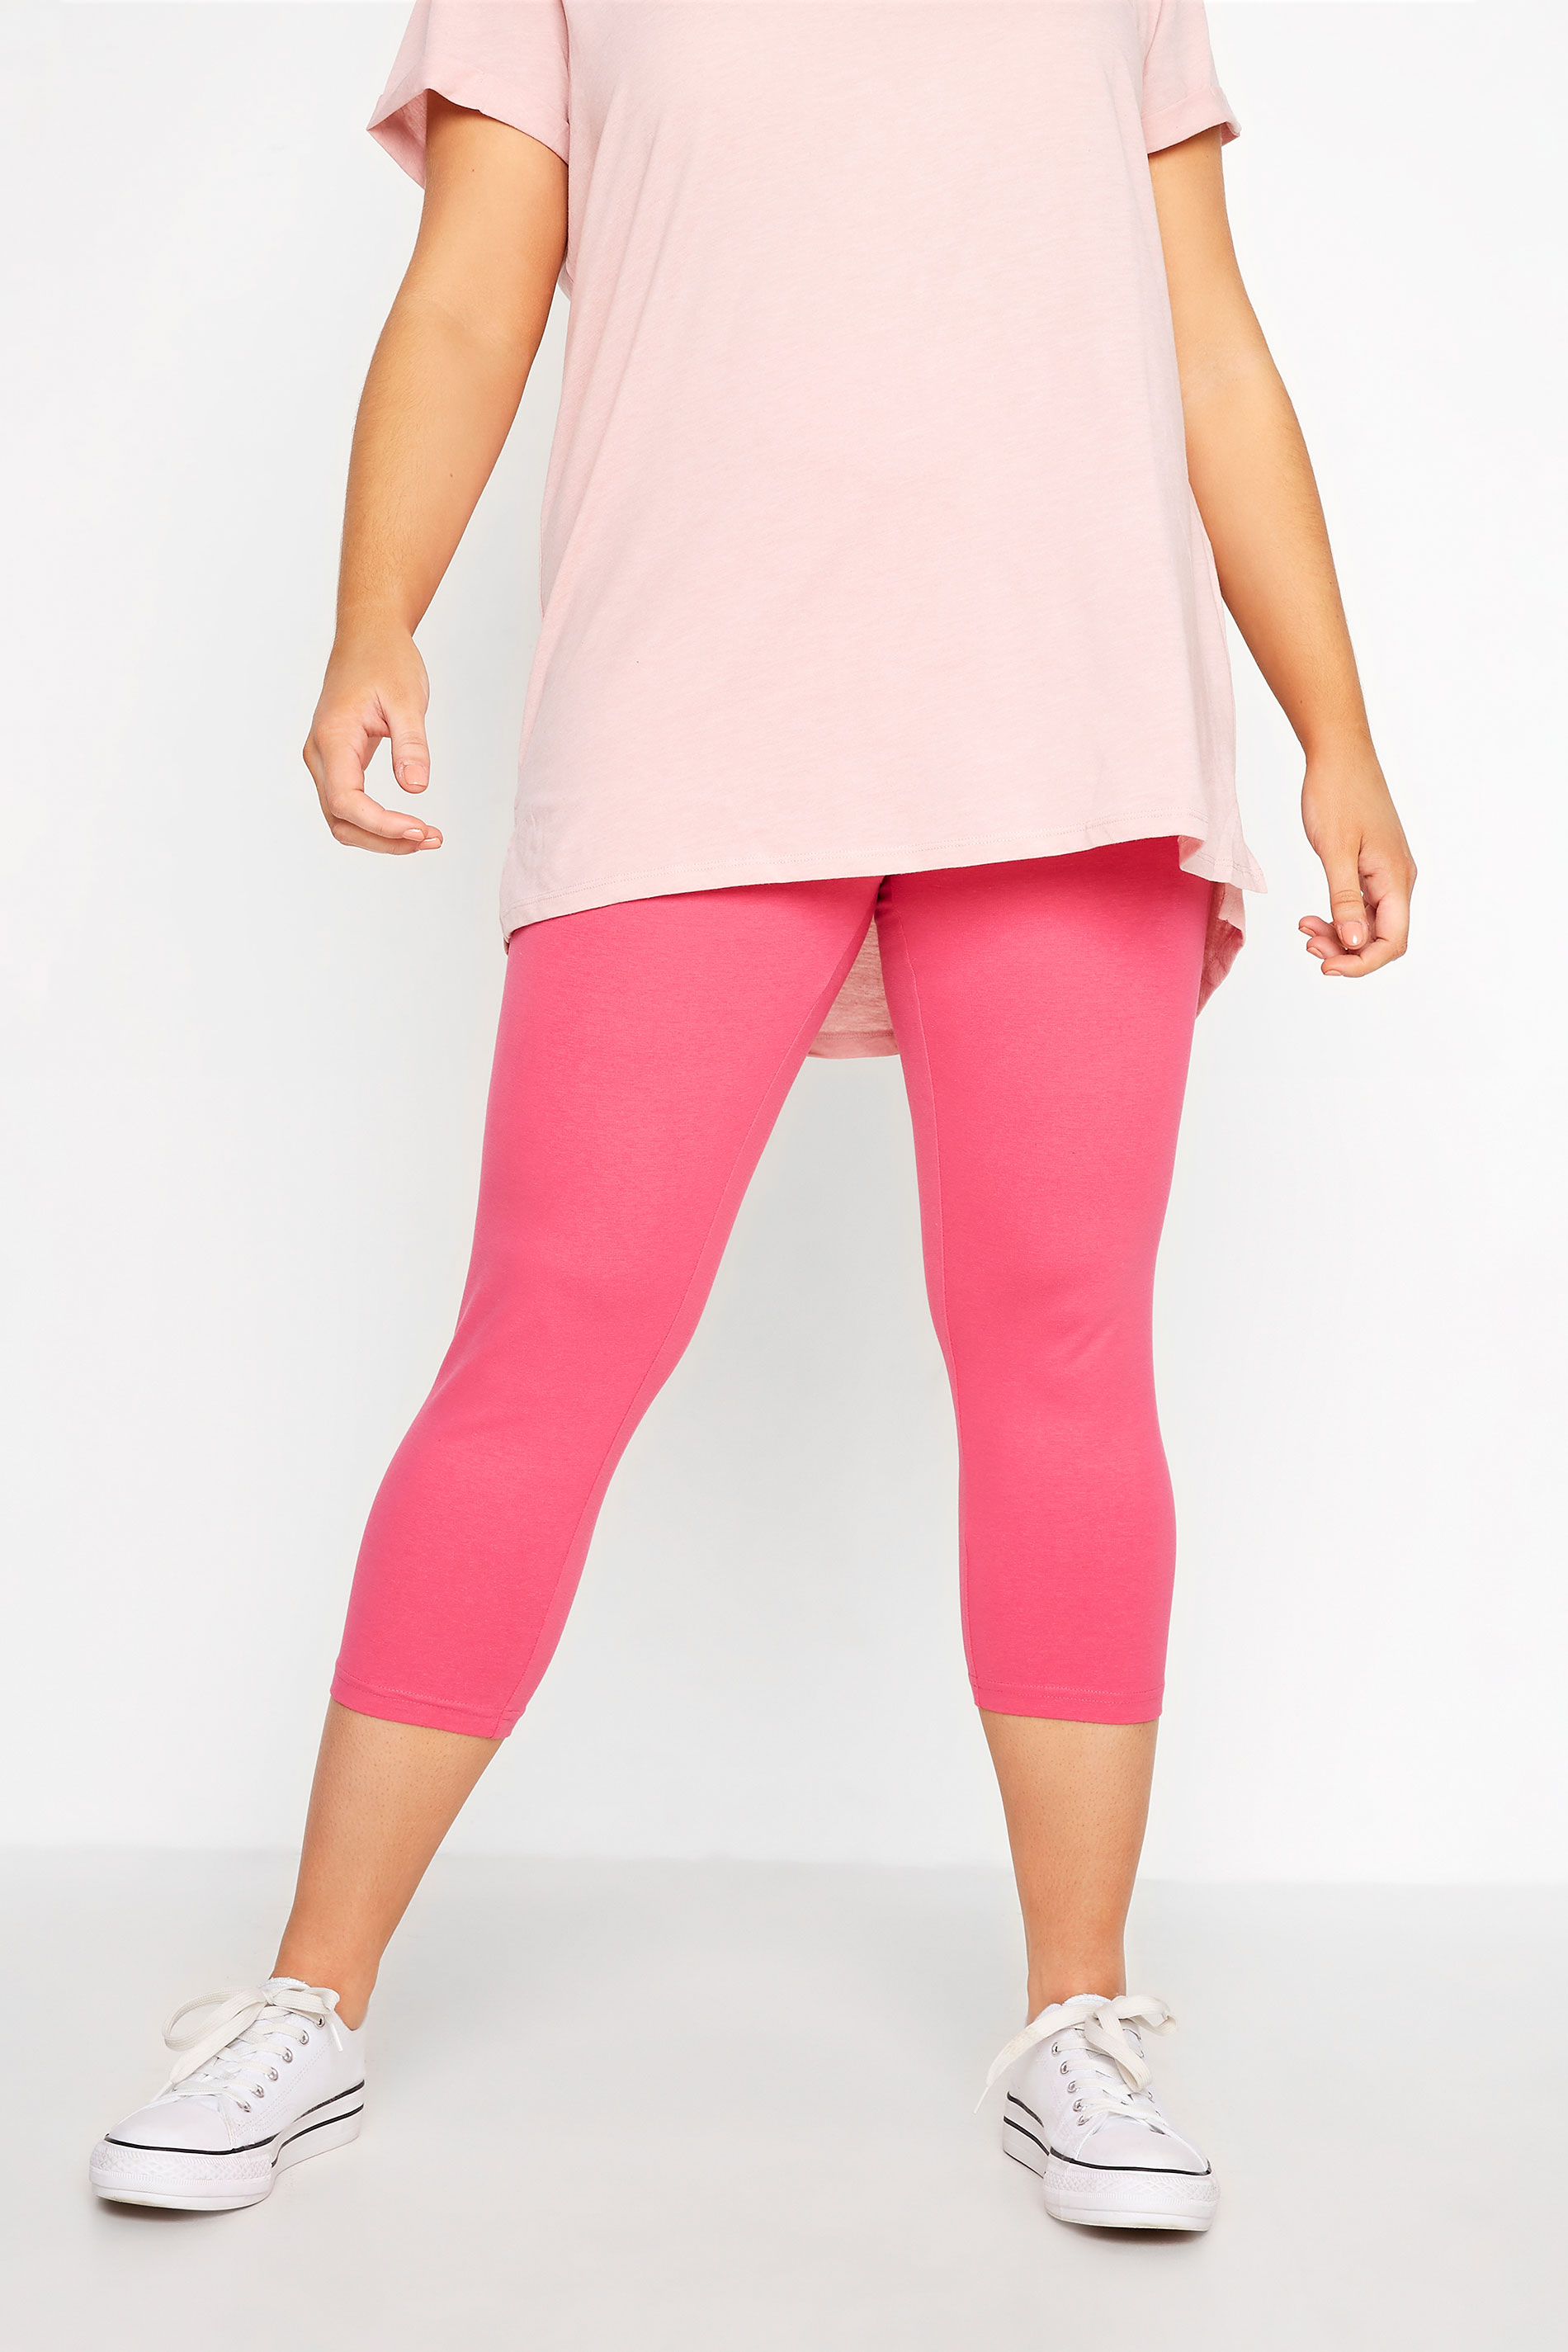 YOURS FOR GOOD Curve Bright Pink Cropped Leggings_A.jpg